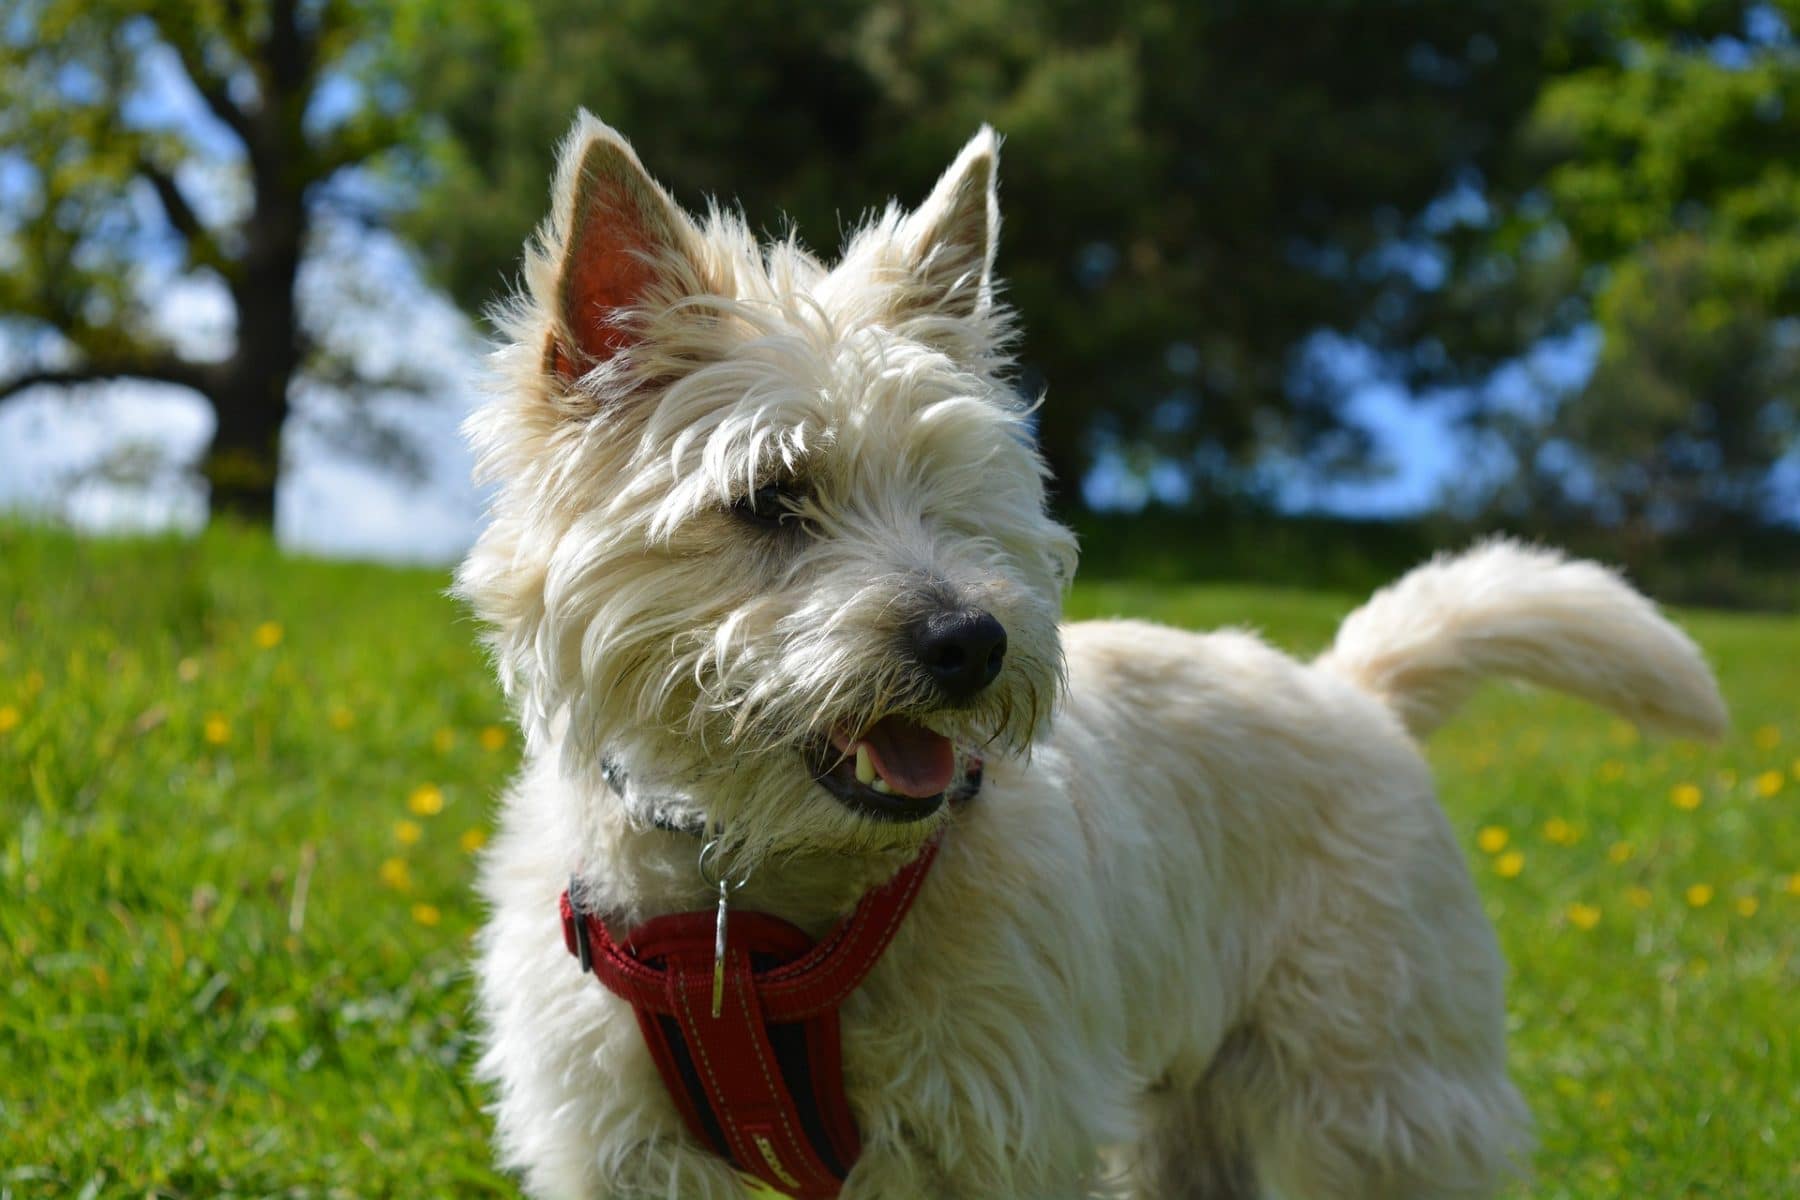 Cairn Terrier Grooming The Essential Guide With Pictures Of Haircut Styles